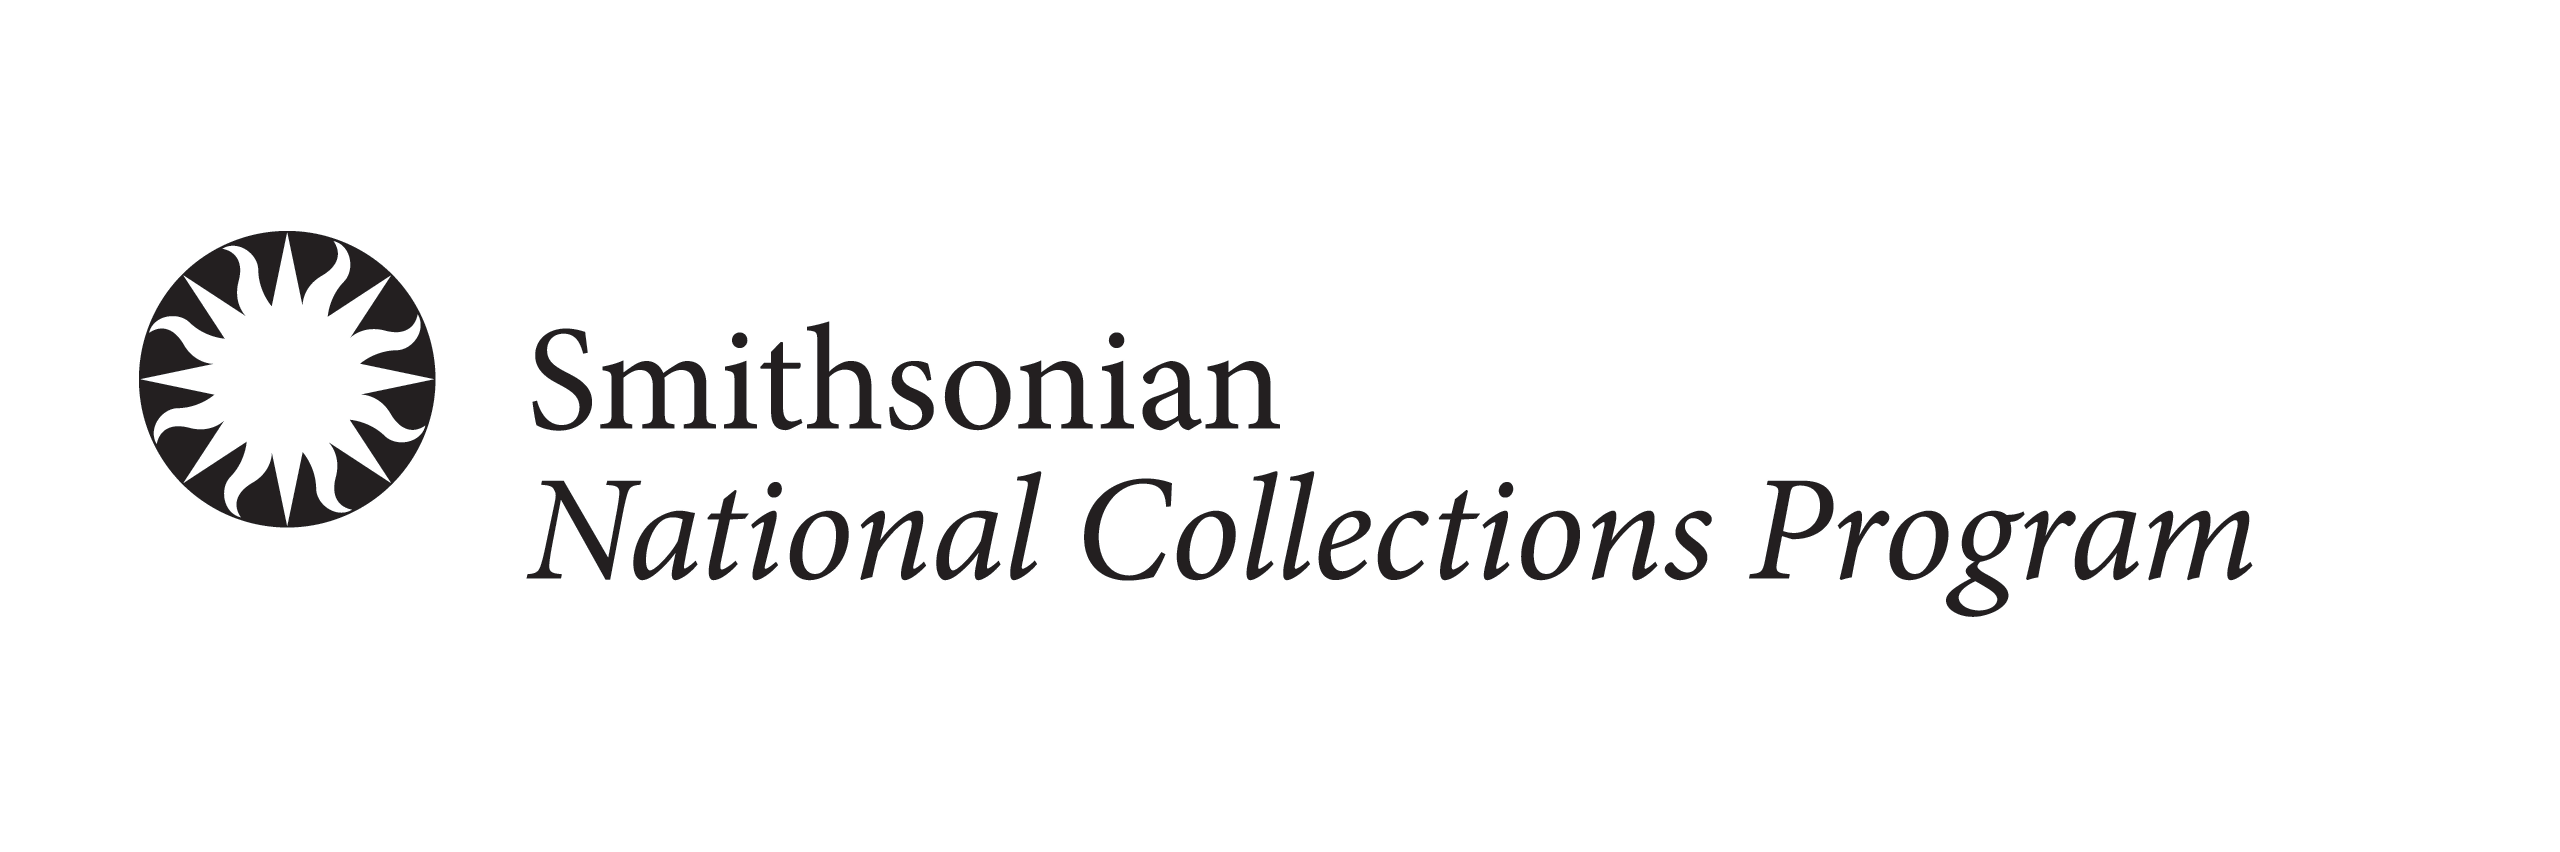 National Collections Program